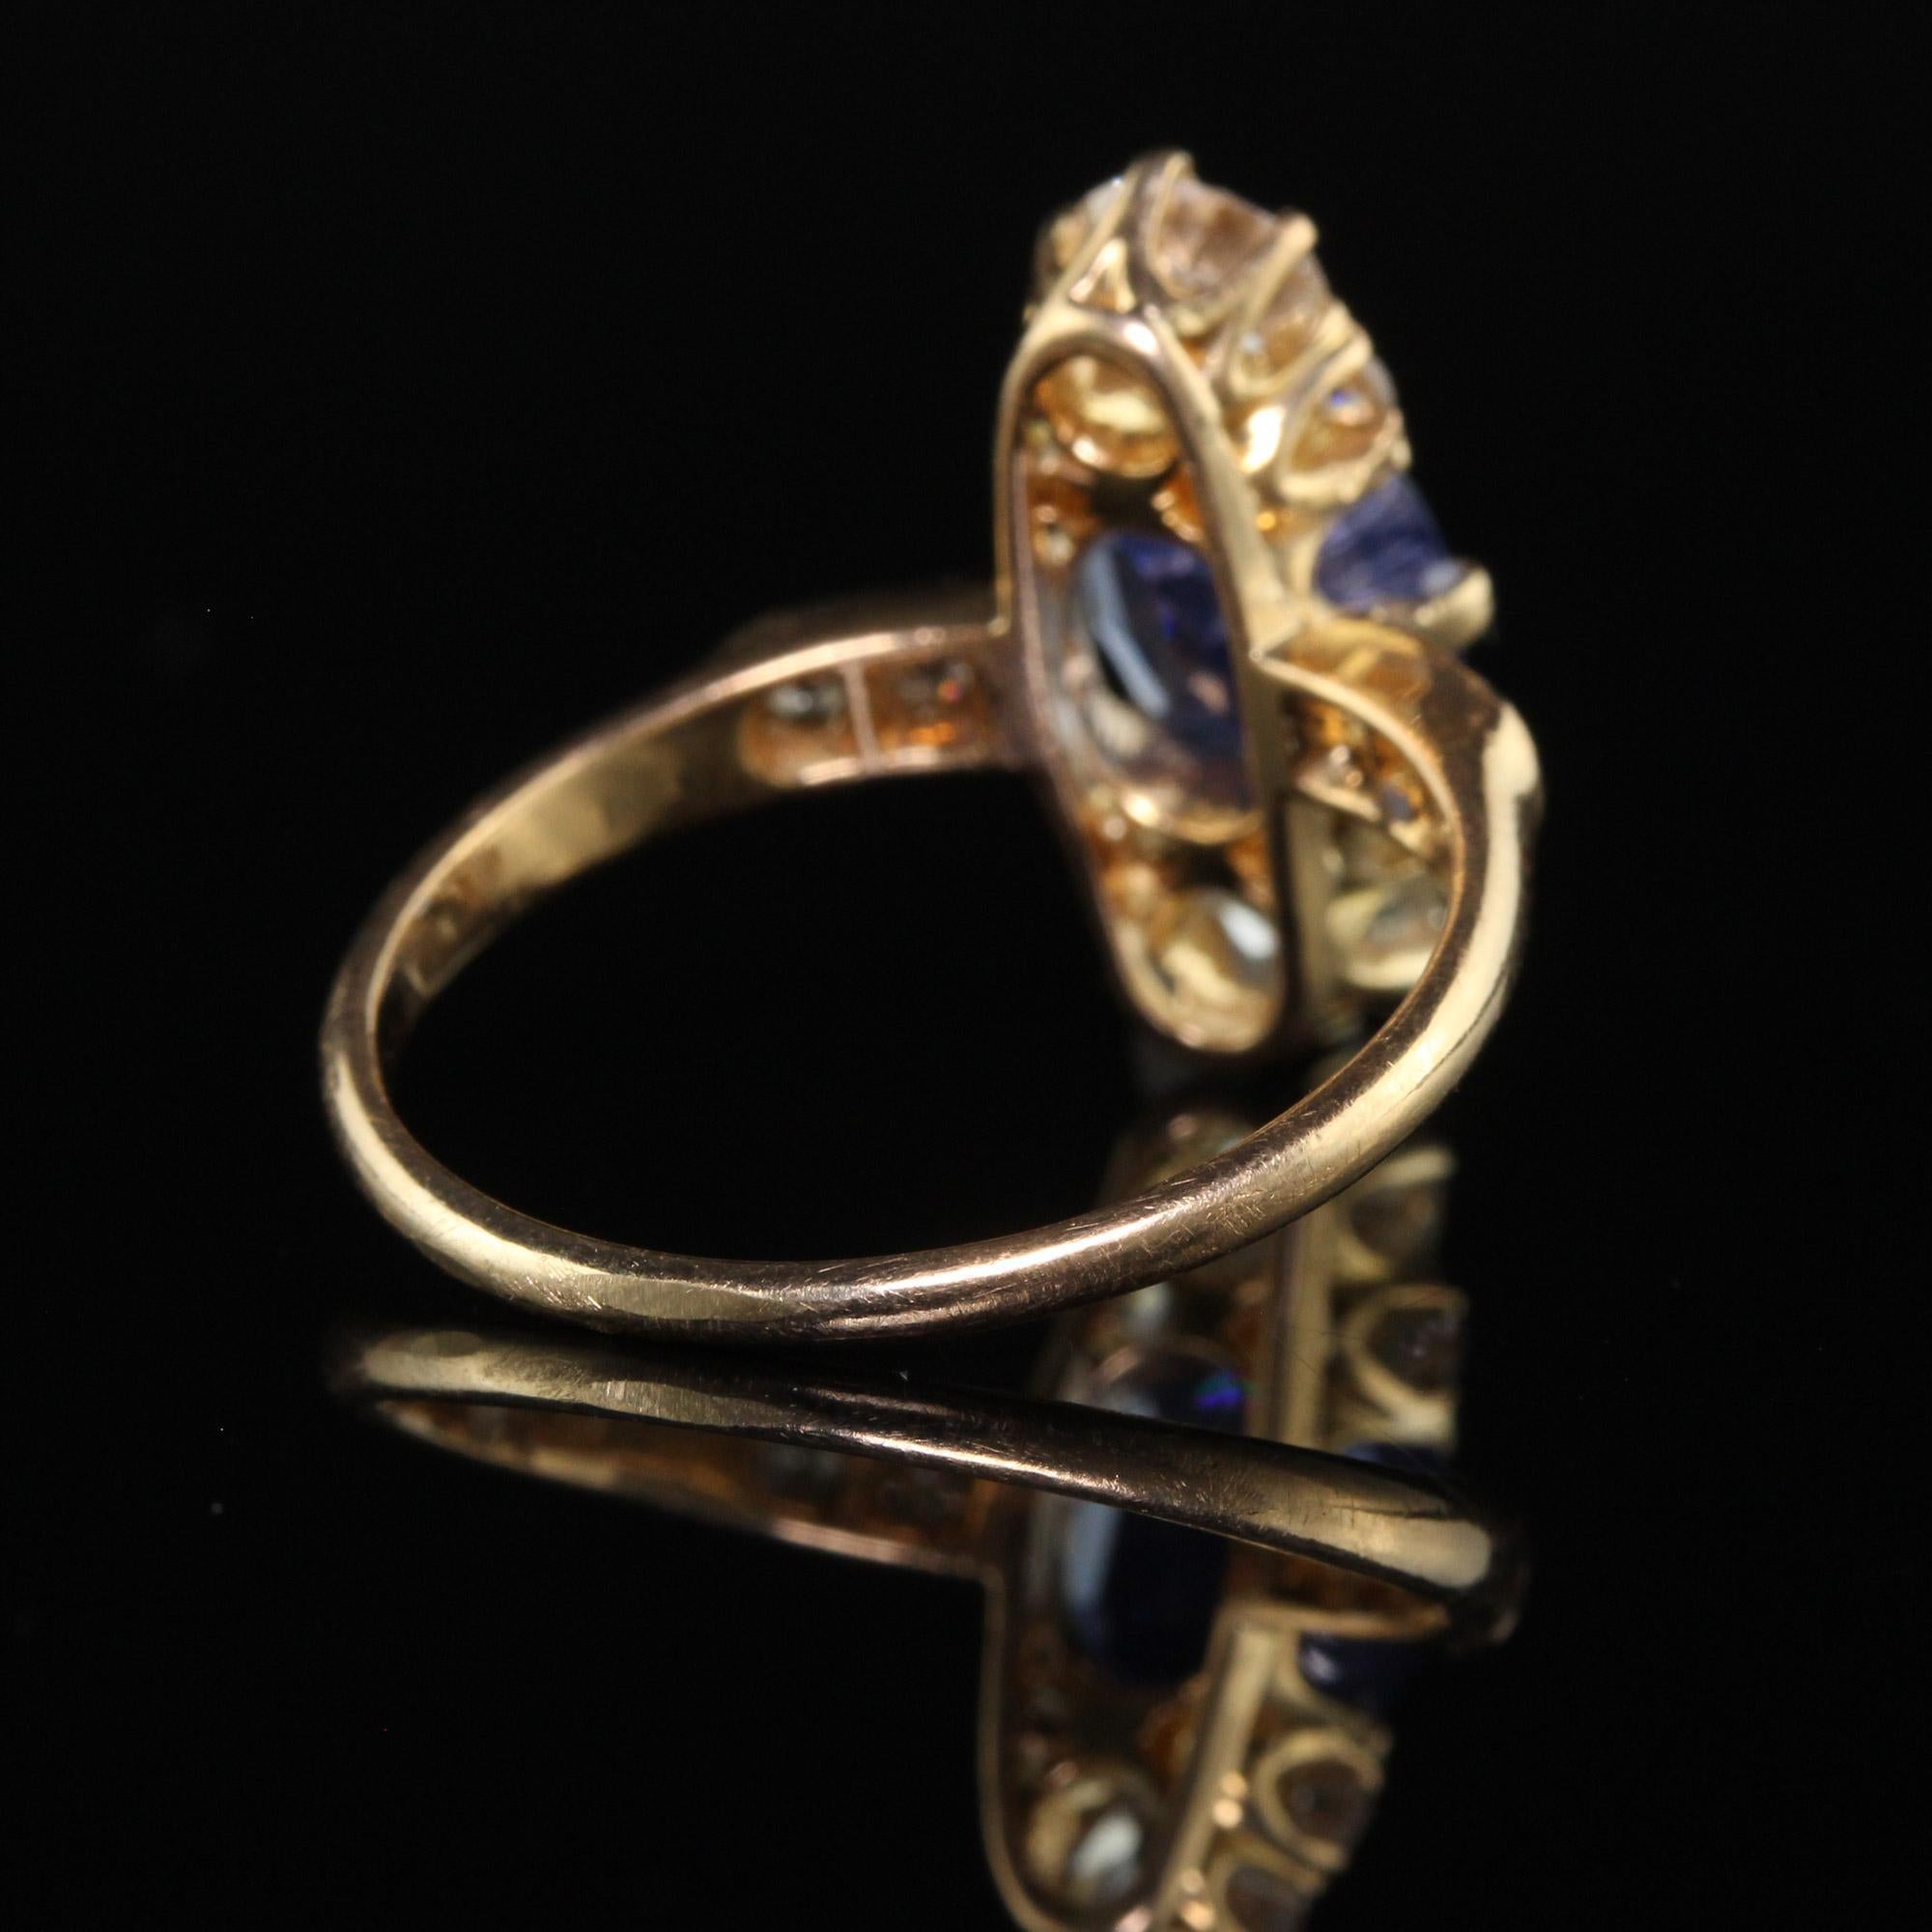 Antique Art Deco Bailey Banks Biddle 18K Yellow Gold Sapphire Diamond Ring - GIA For Sale 1